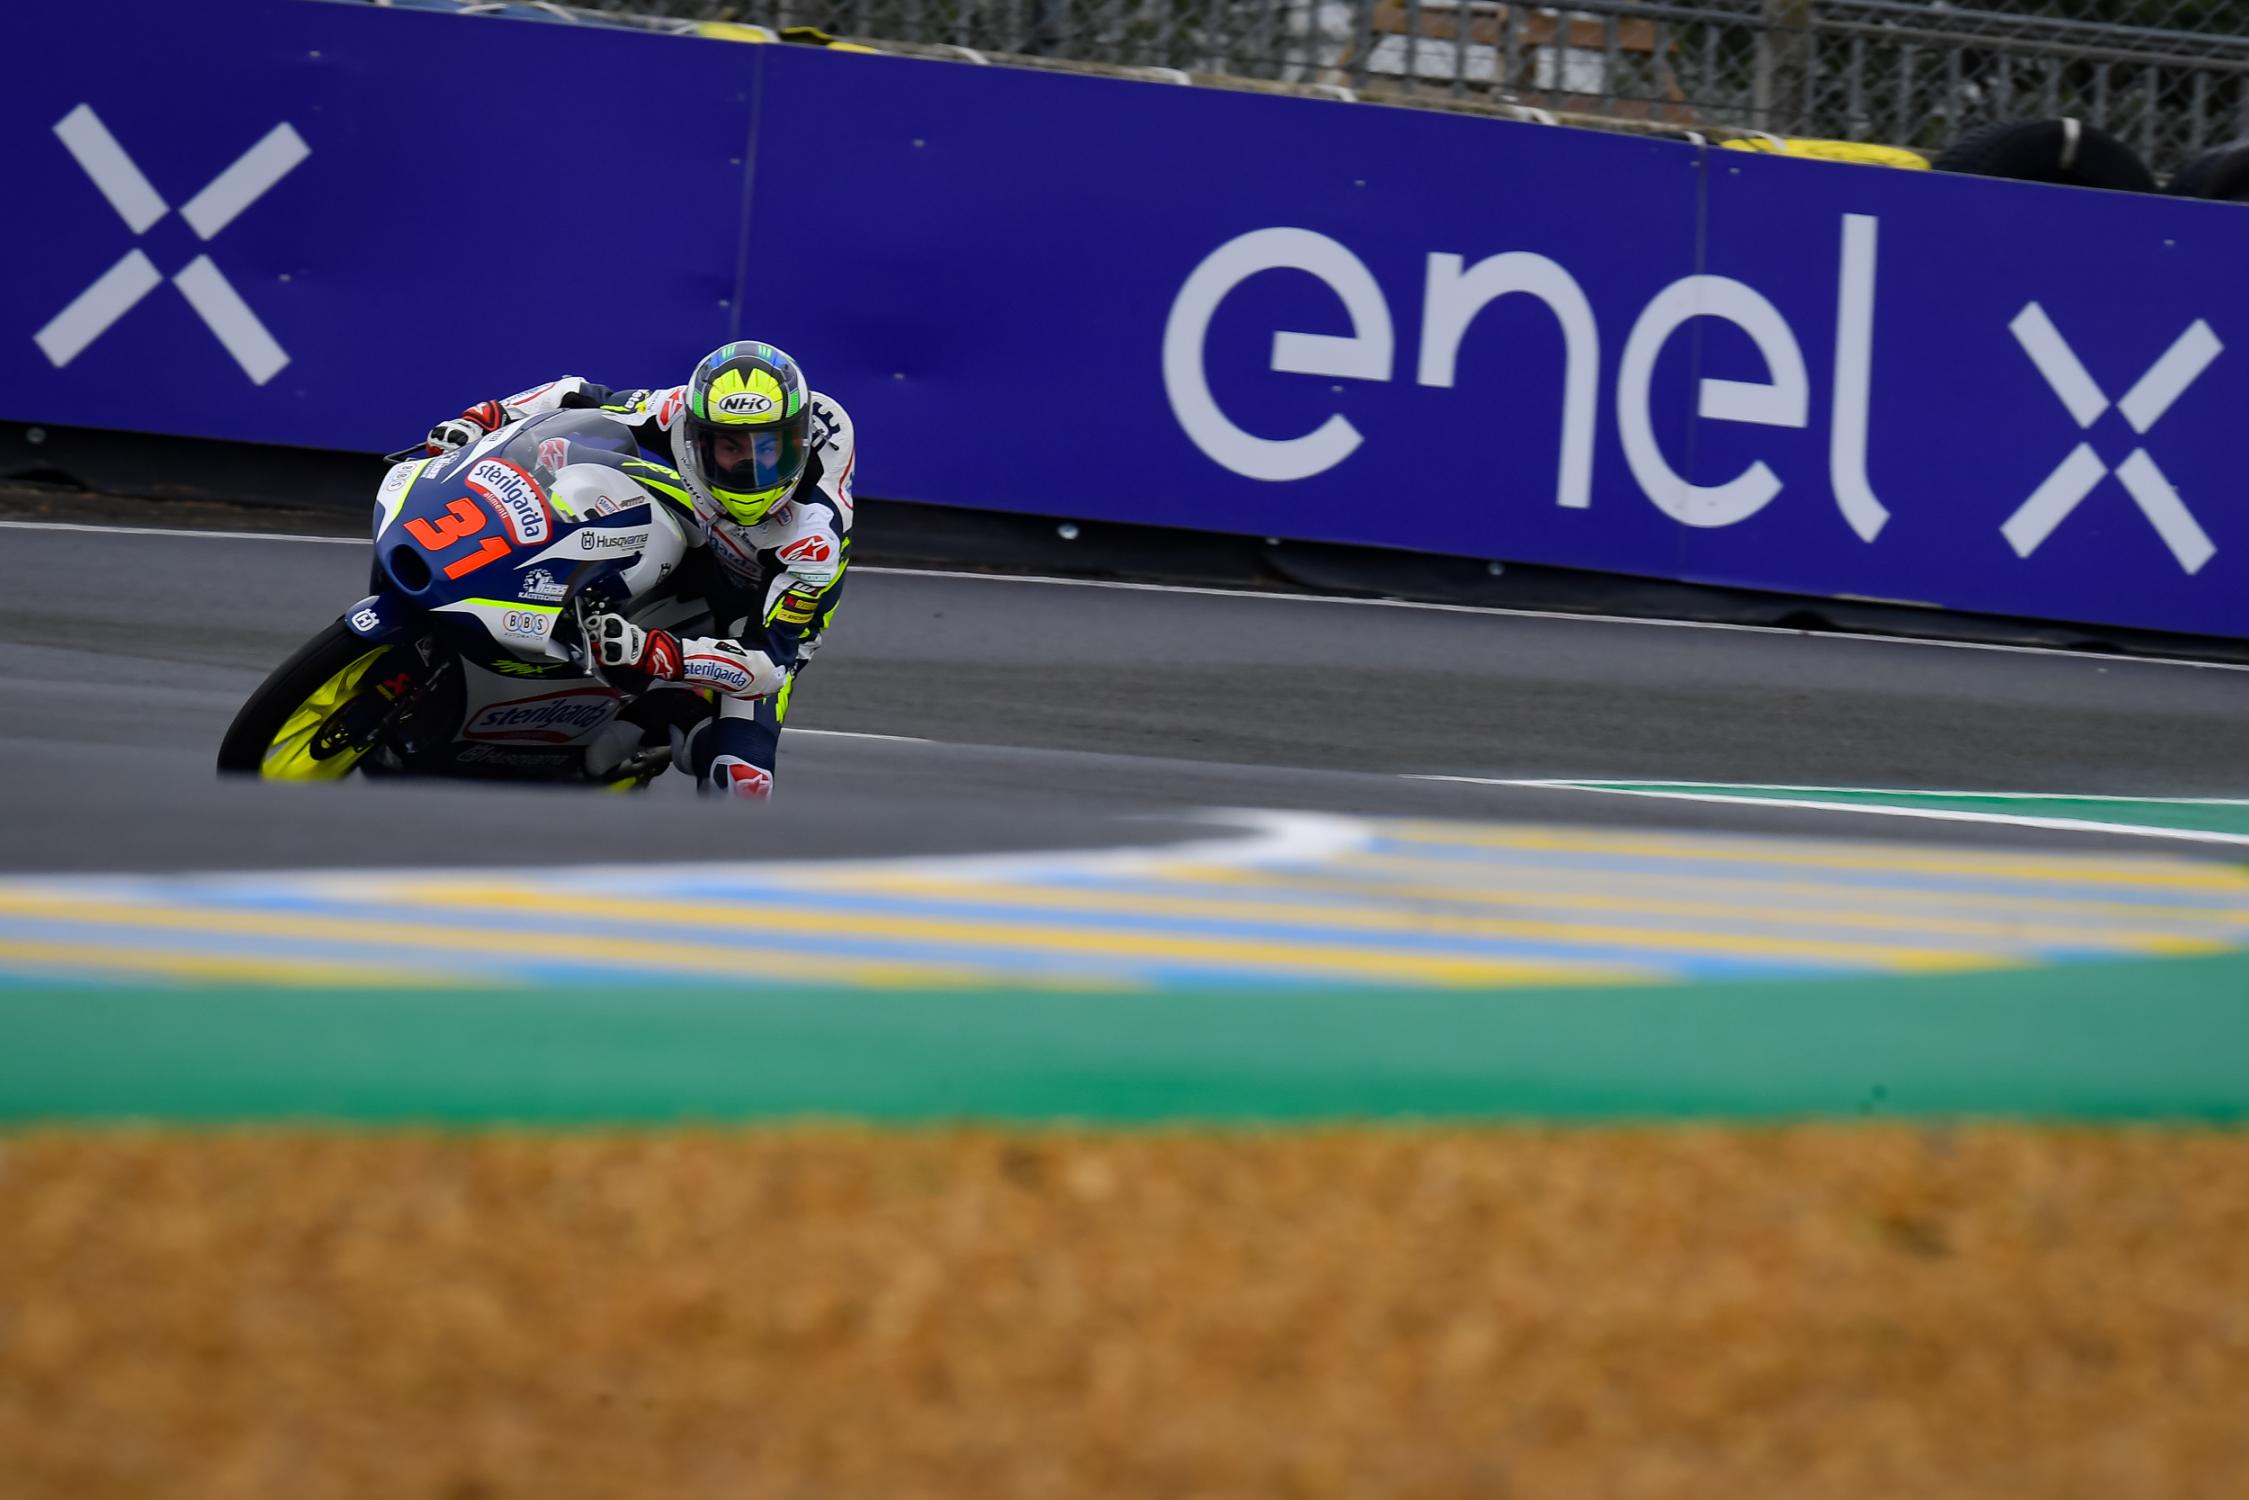 Featured image for “Moto3: Fernandez Tops Carnage-Filled FP3, as Pedro Acosta Heads to Q1”